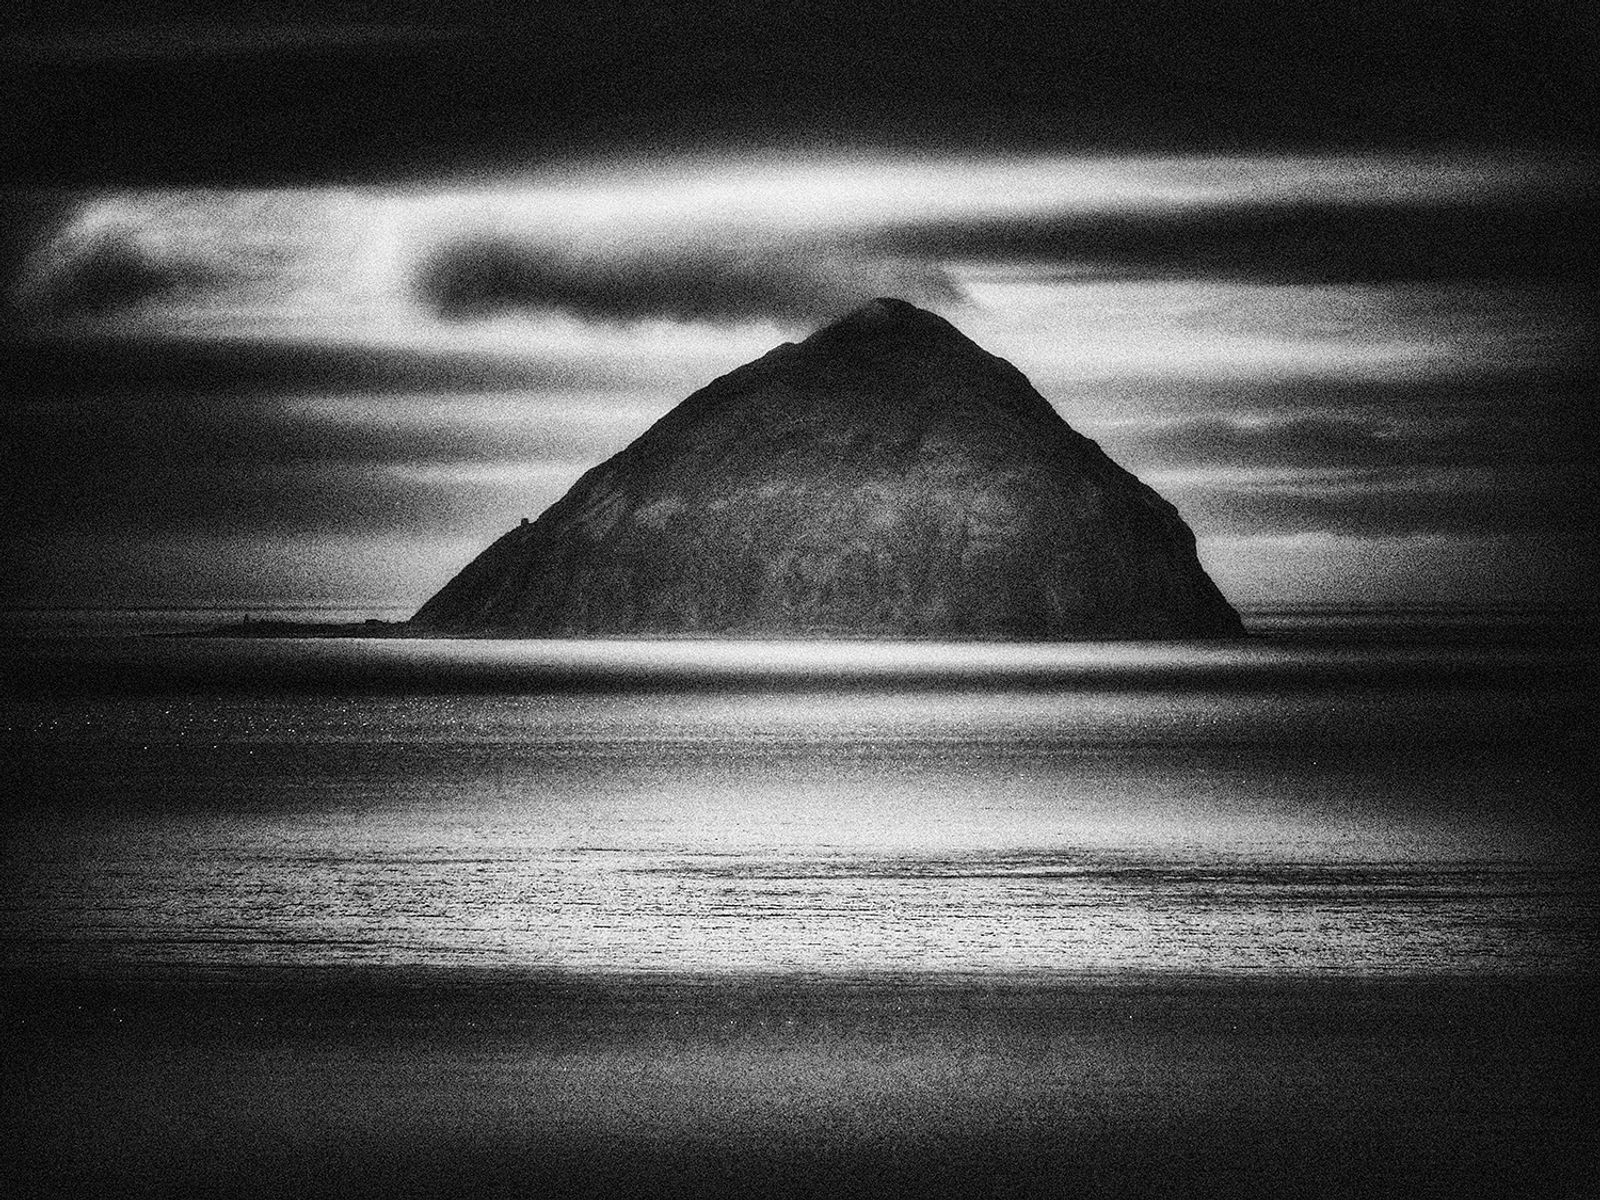 © John Perivolaris - A photograph of the volcanic island of Ailsa Craig, viewed from my home on Arran directly facing it.